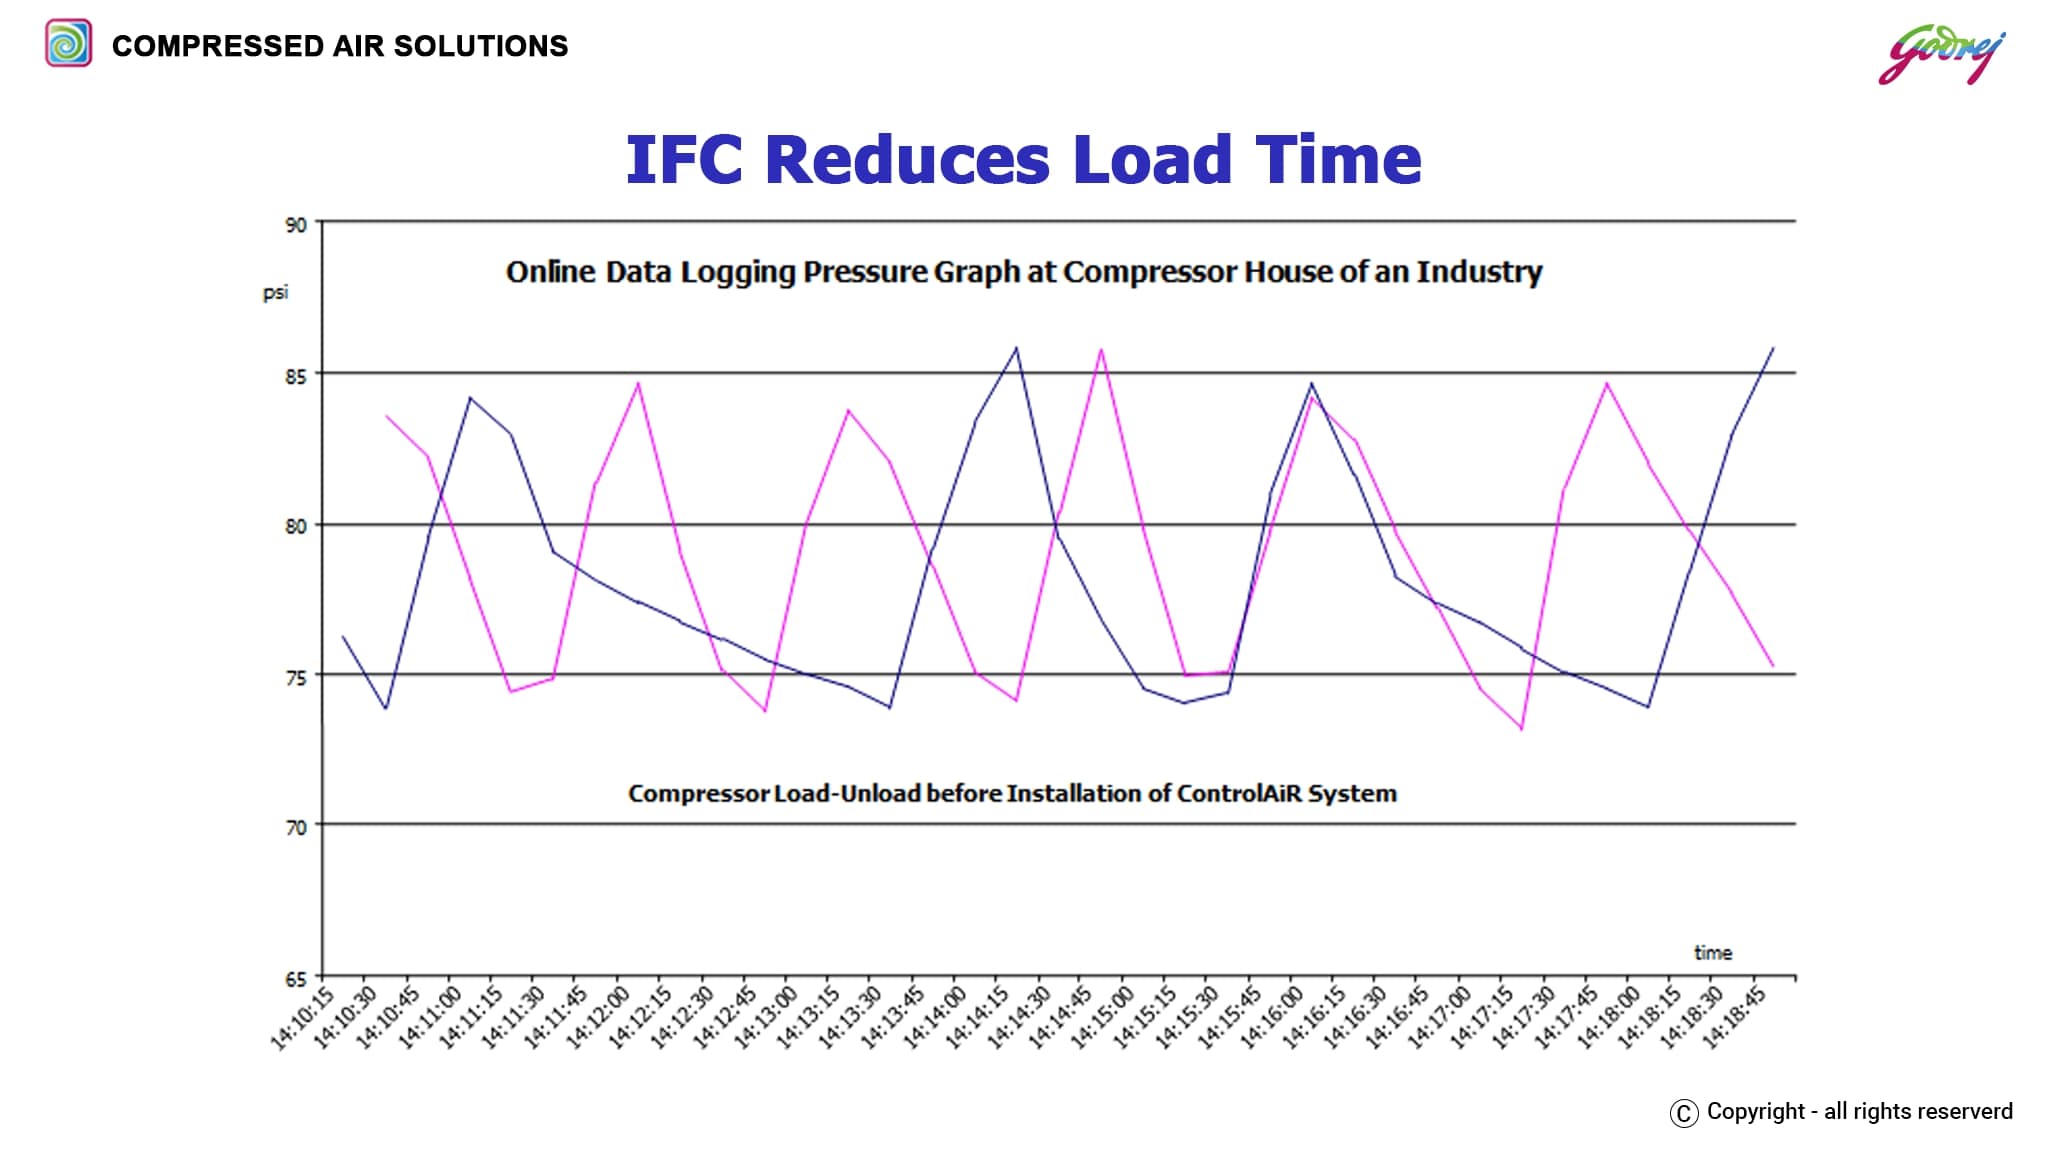 IFC Reduces Load Time-ENERGY SAVING SOLUTIONS IN COMPRESSED AIR NETWORK (GODREJ)